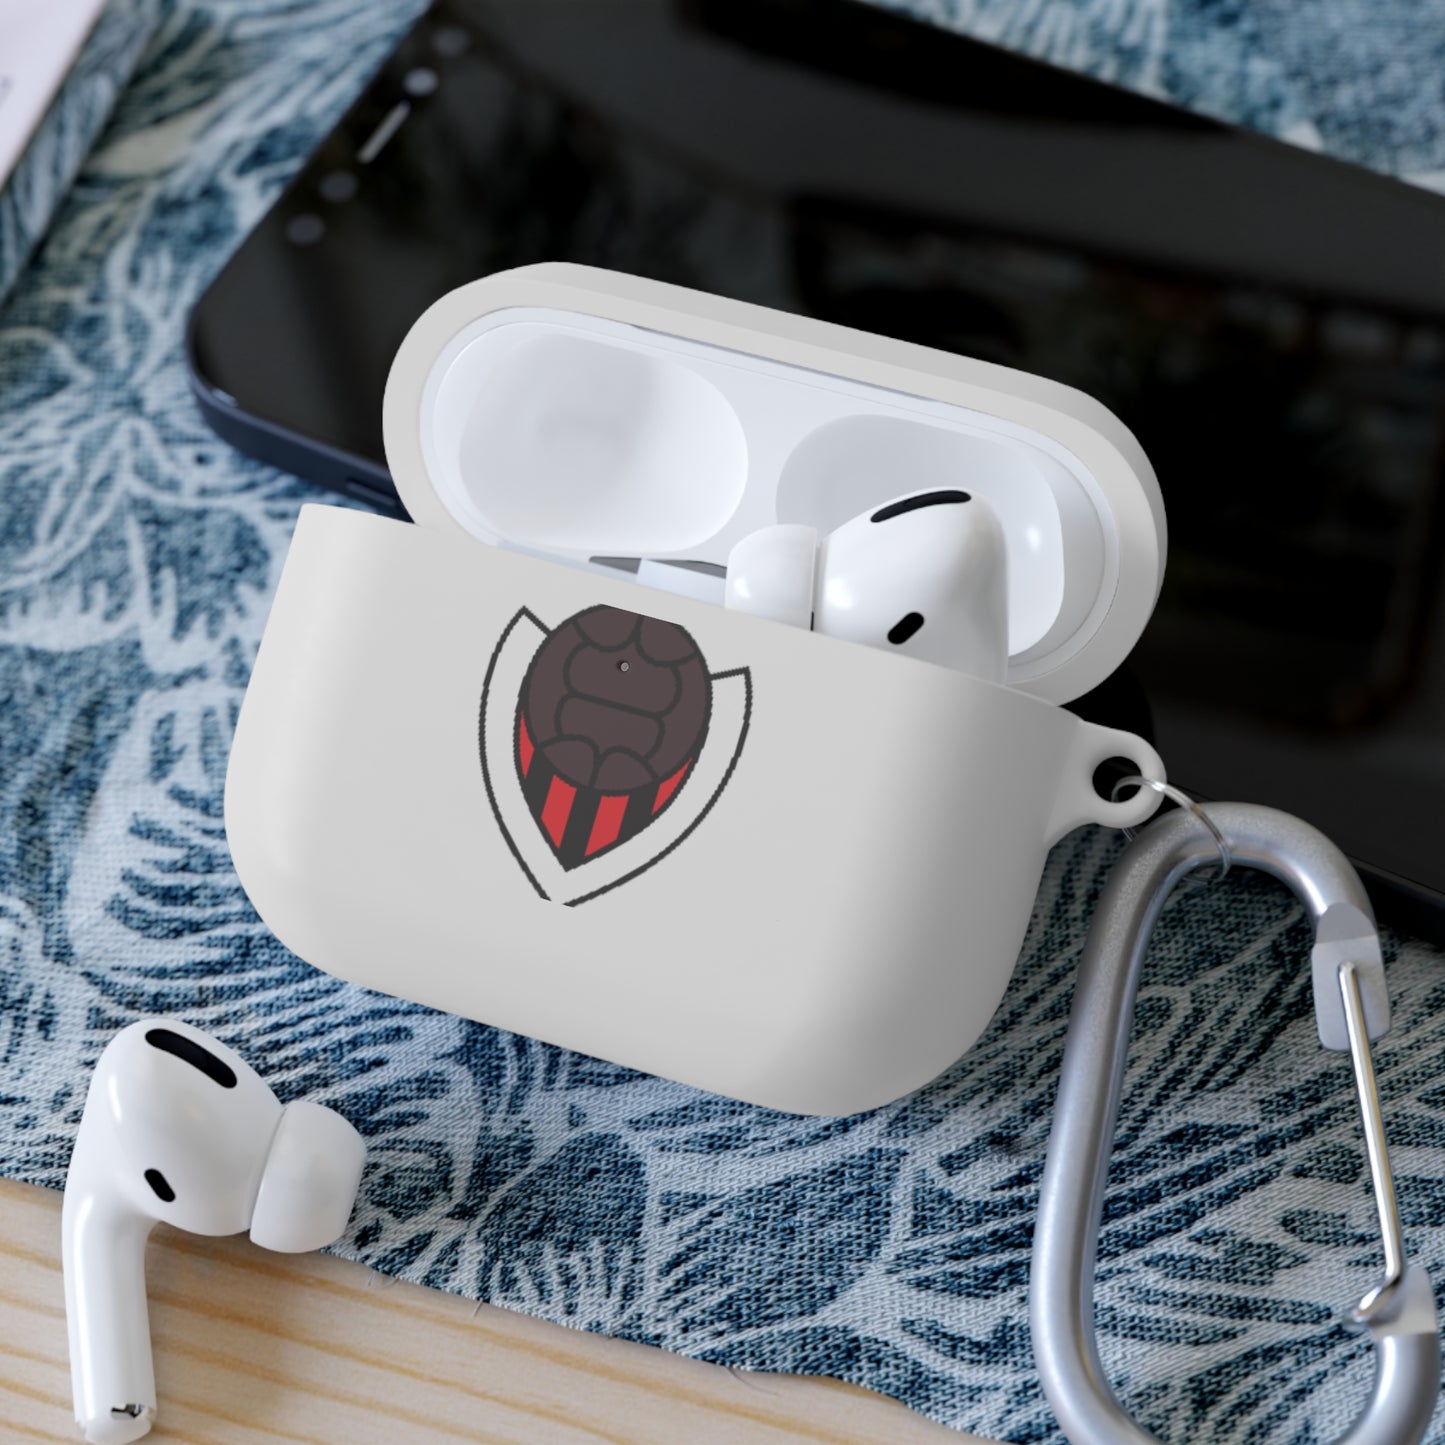 Vikingur Reykjavik AirPods and AirPods Pro Case Cover